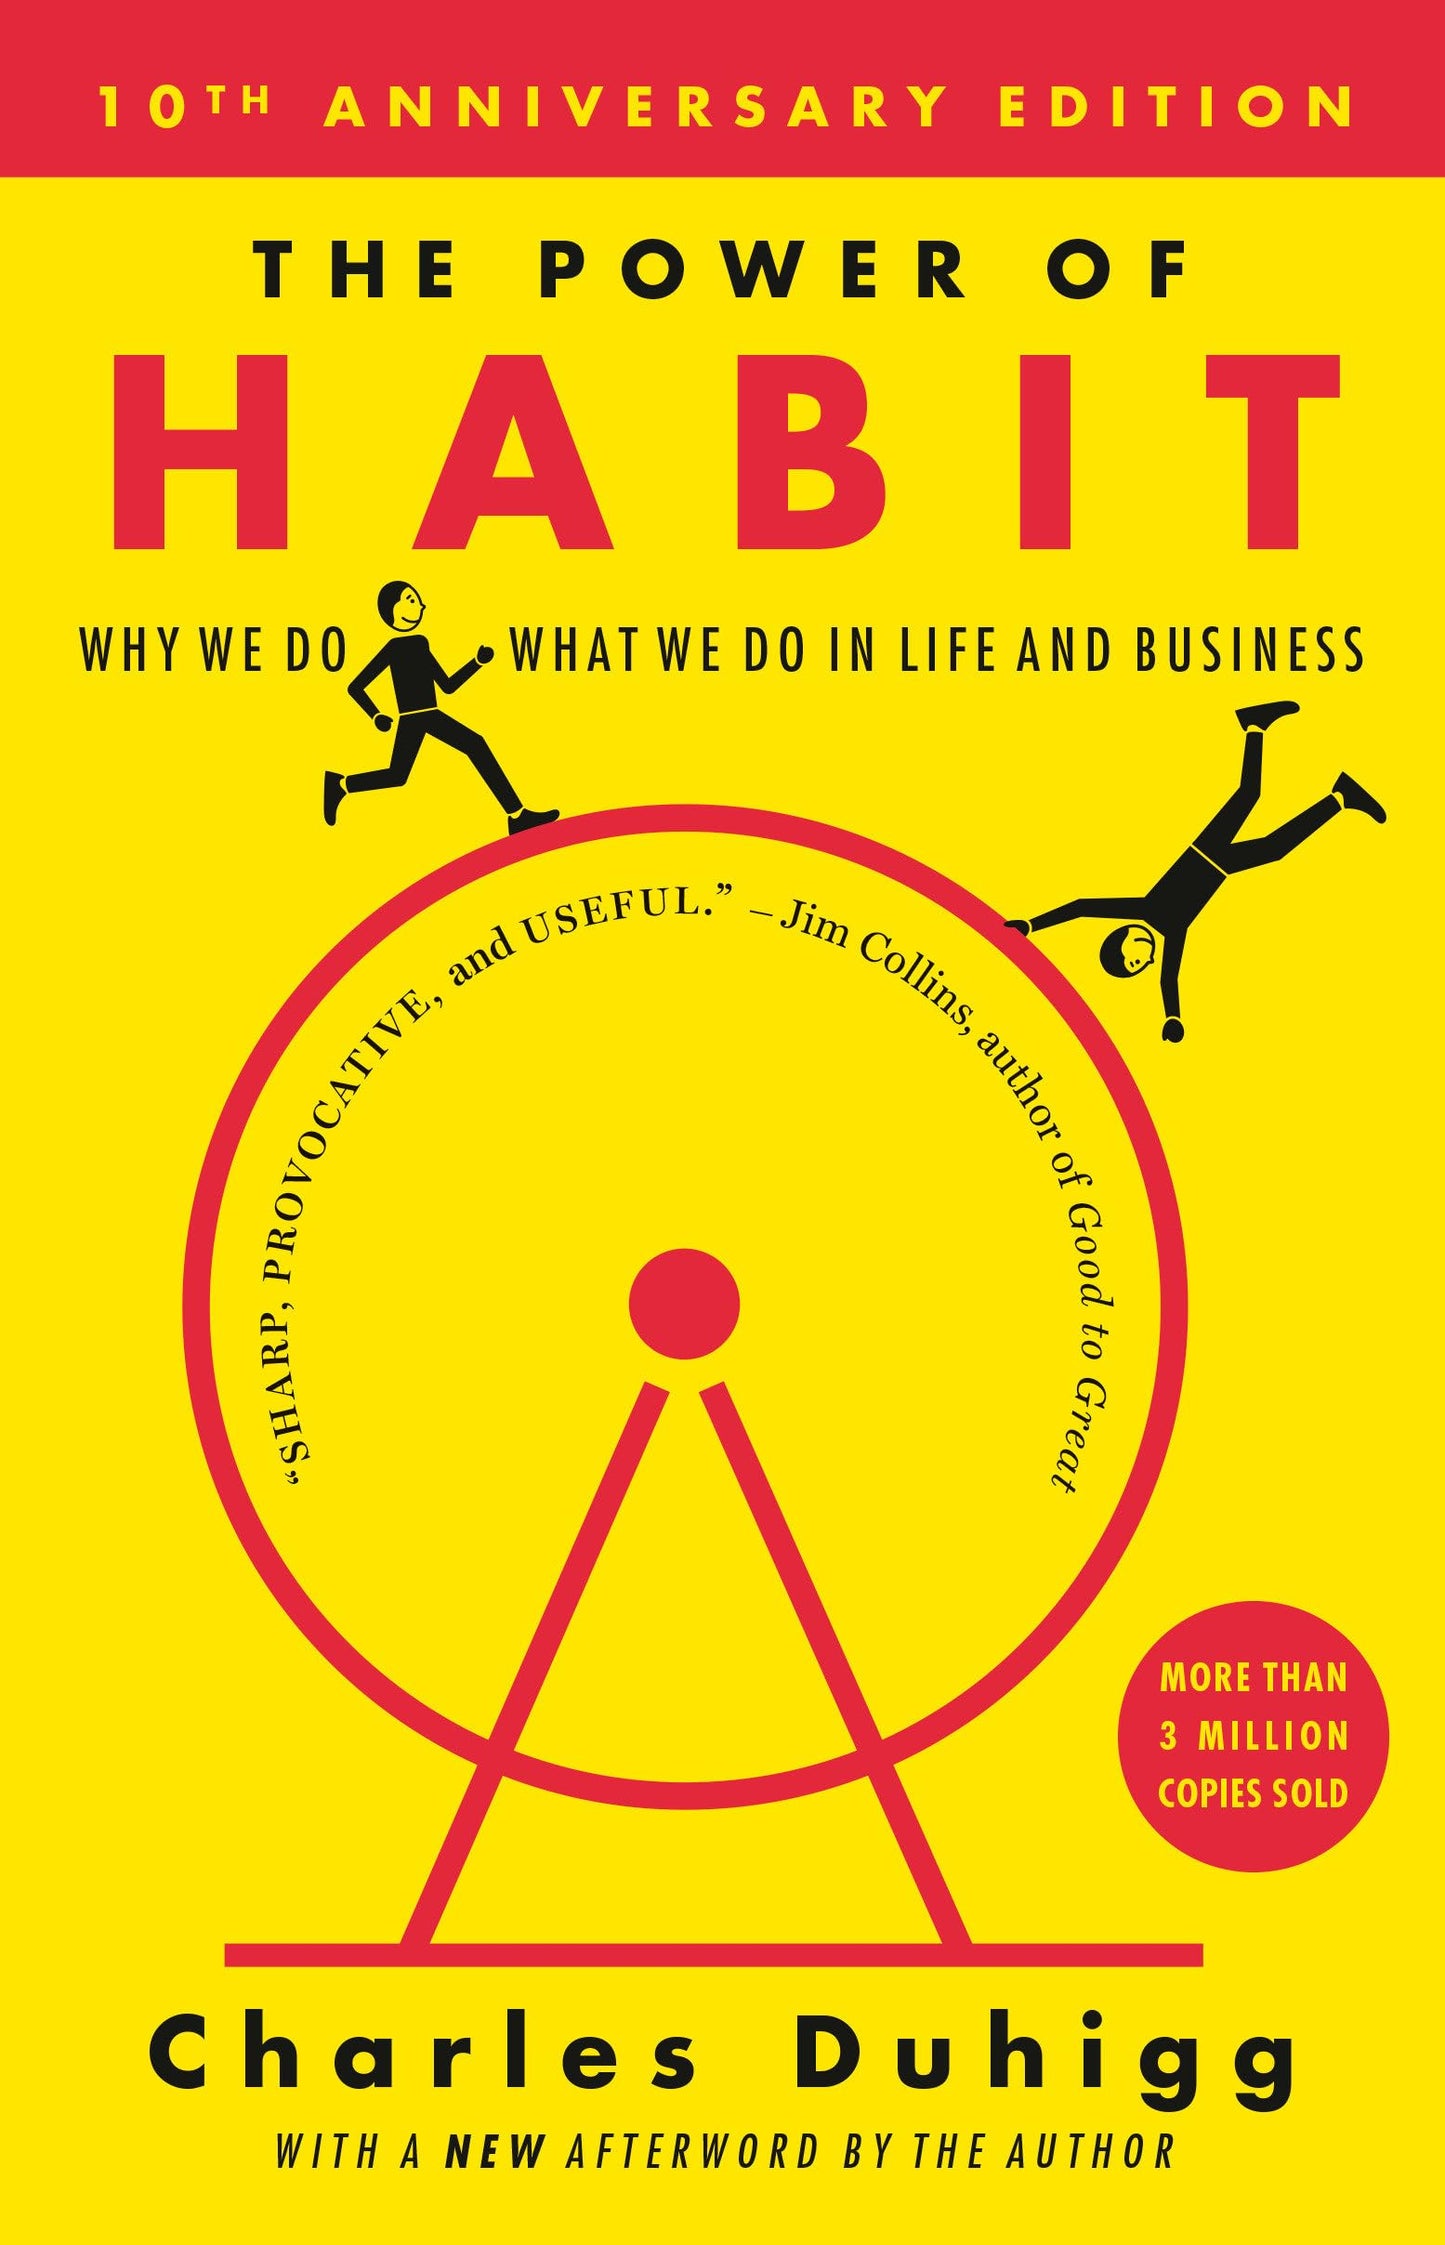 Power of Habit: Why We Do What We Do in Life and Business